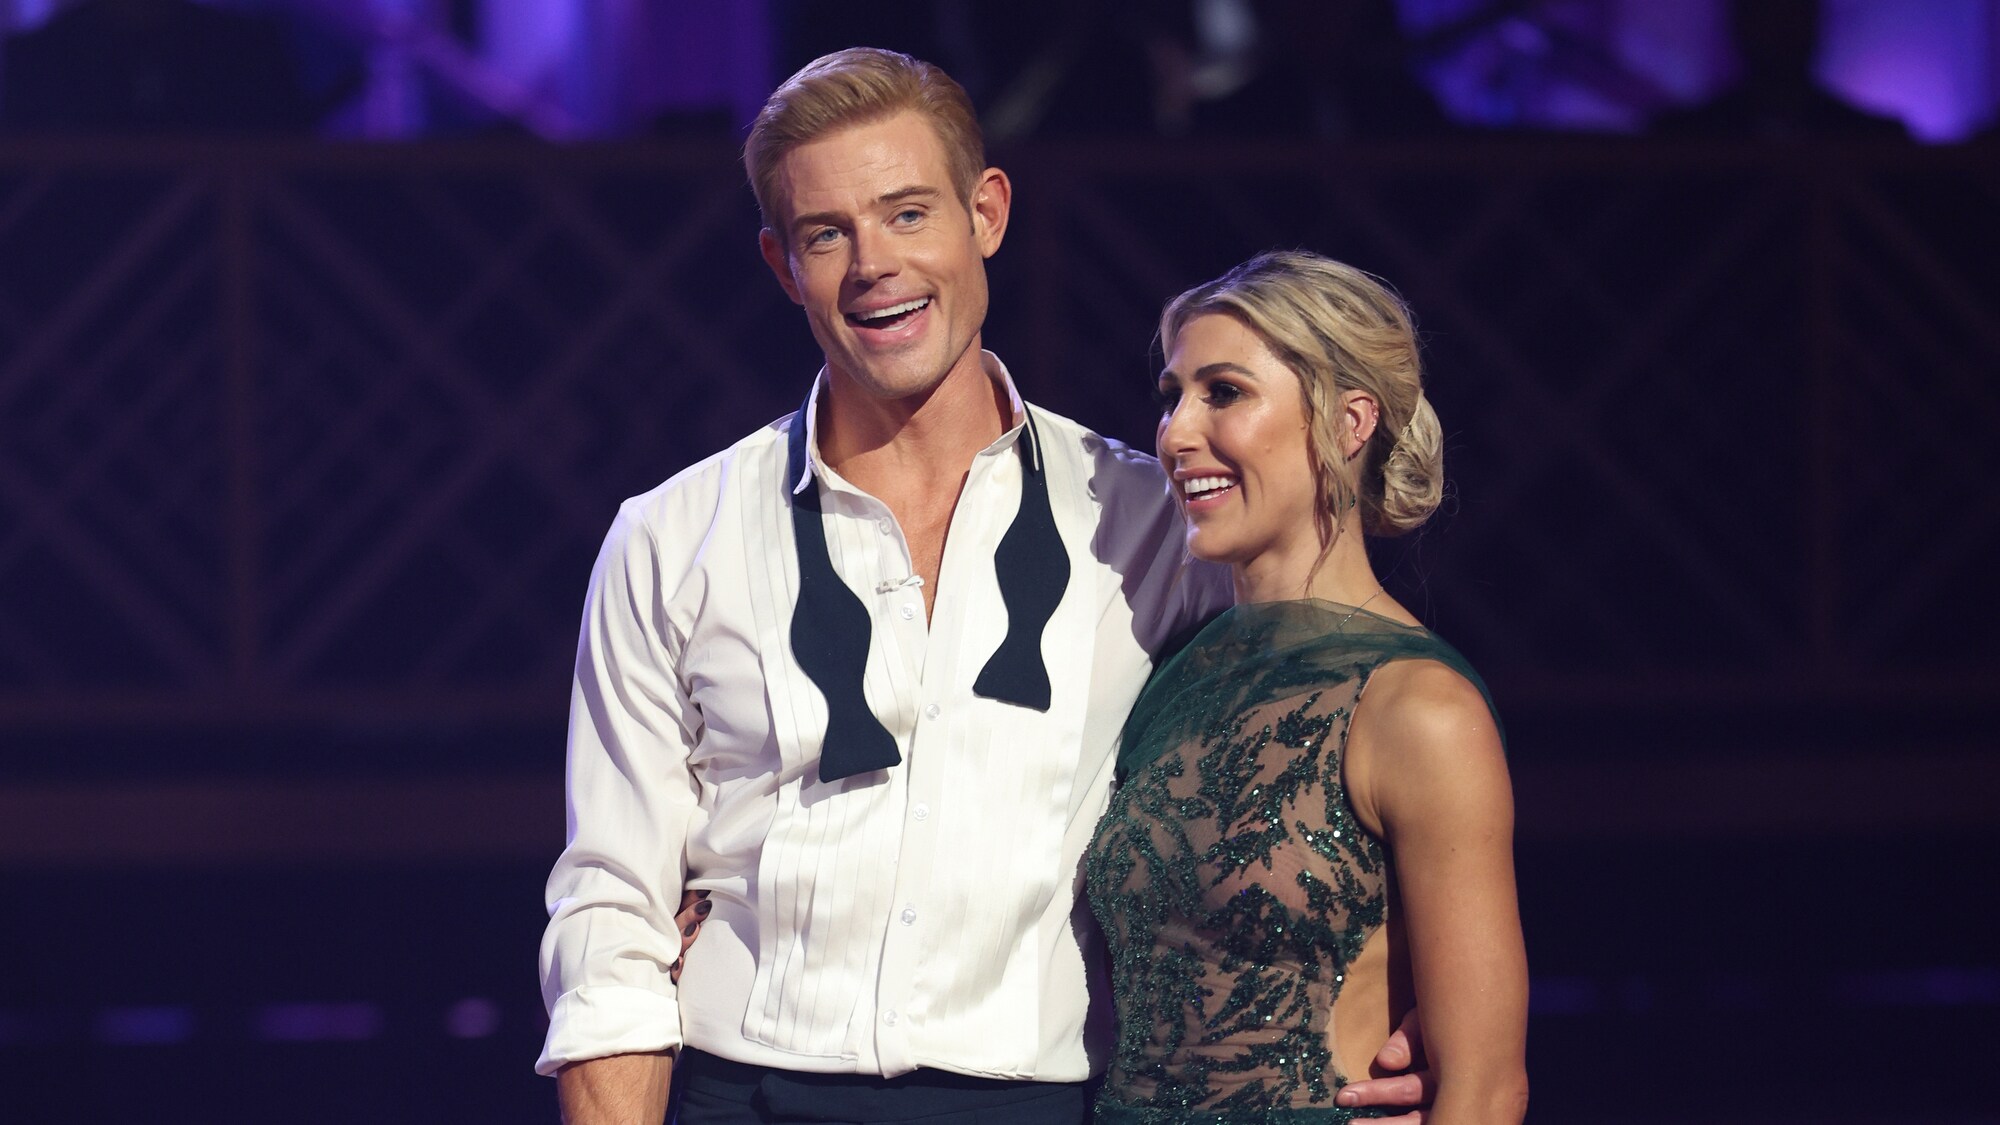 DANCING WITH THE STARS - “Semi-Finals” – The mirrorball competition heats up as the six remaining contestants head into the “Semi-Finals.” Each couple will perform two all-new routines as they fight for a spot in the finale. A new episode of “Dancing with the Stars” will stream live MONDAY, NOV. 14 (8:00pm ET / 5:00pm PT), on Disney+. (ABC/Raymond Liu) TREVOR DONOVAN, EMMA SLATER